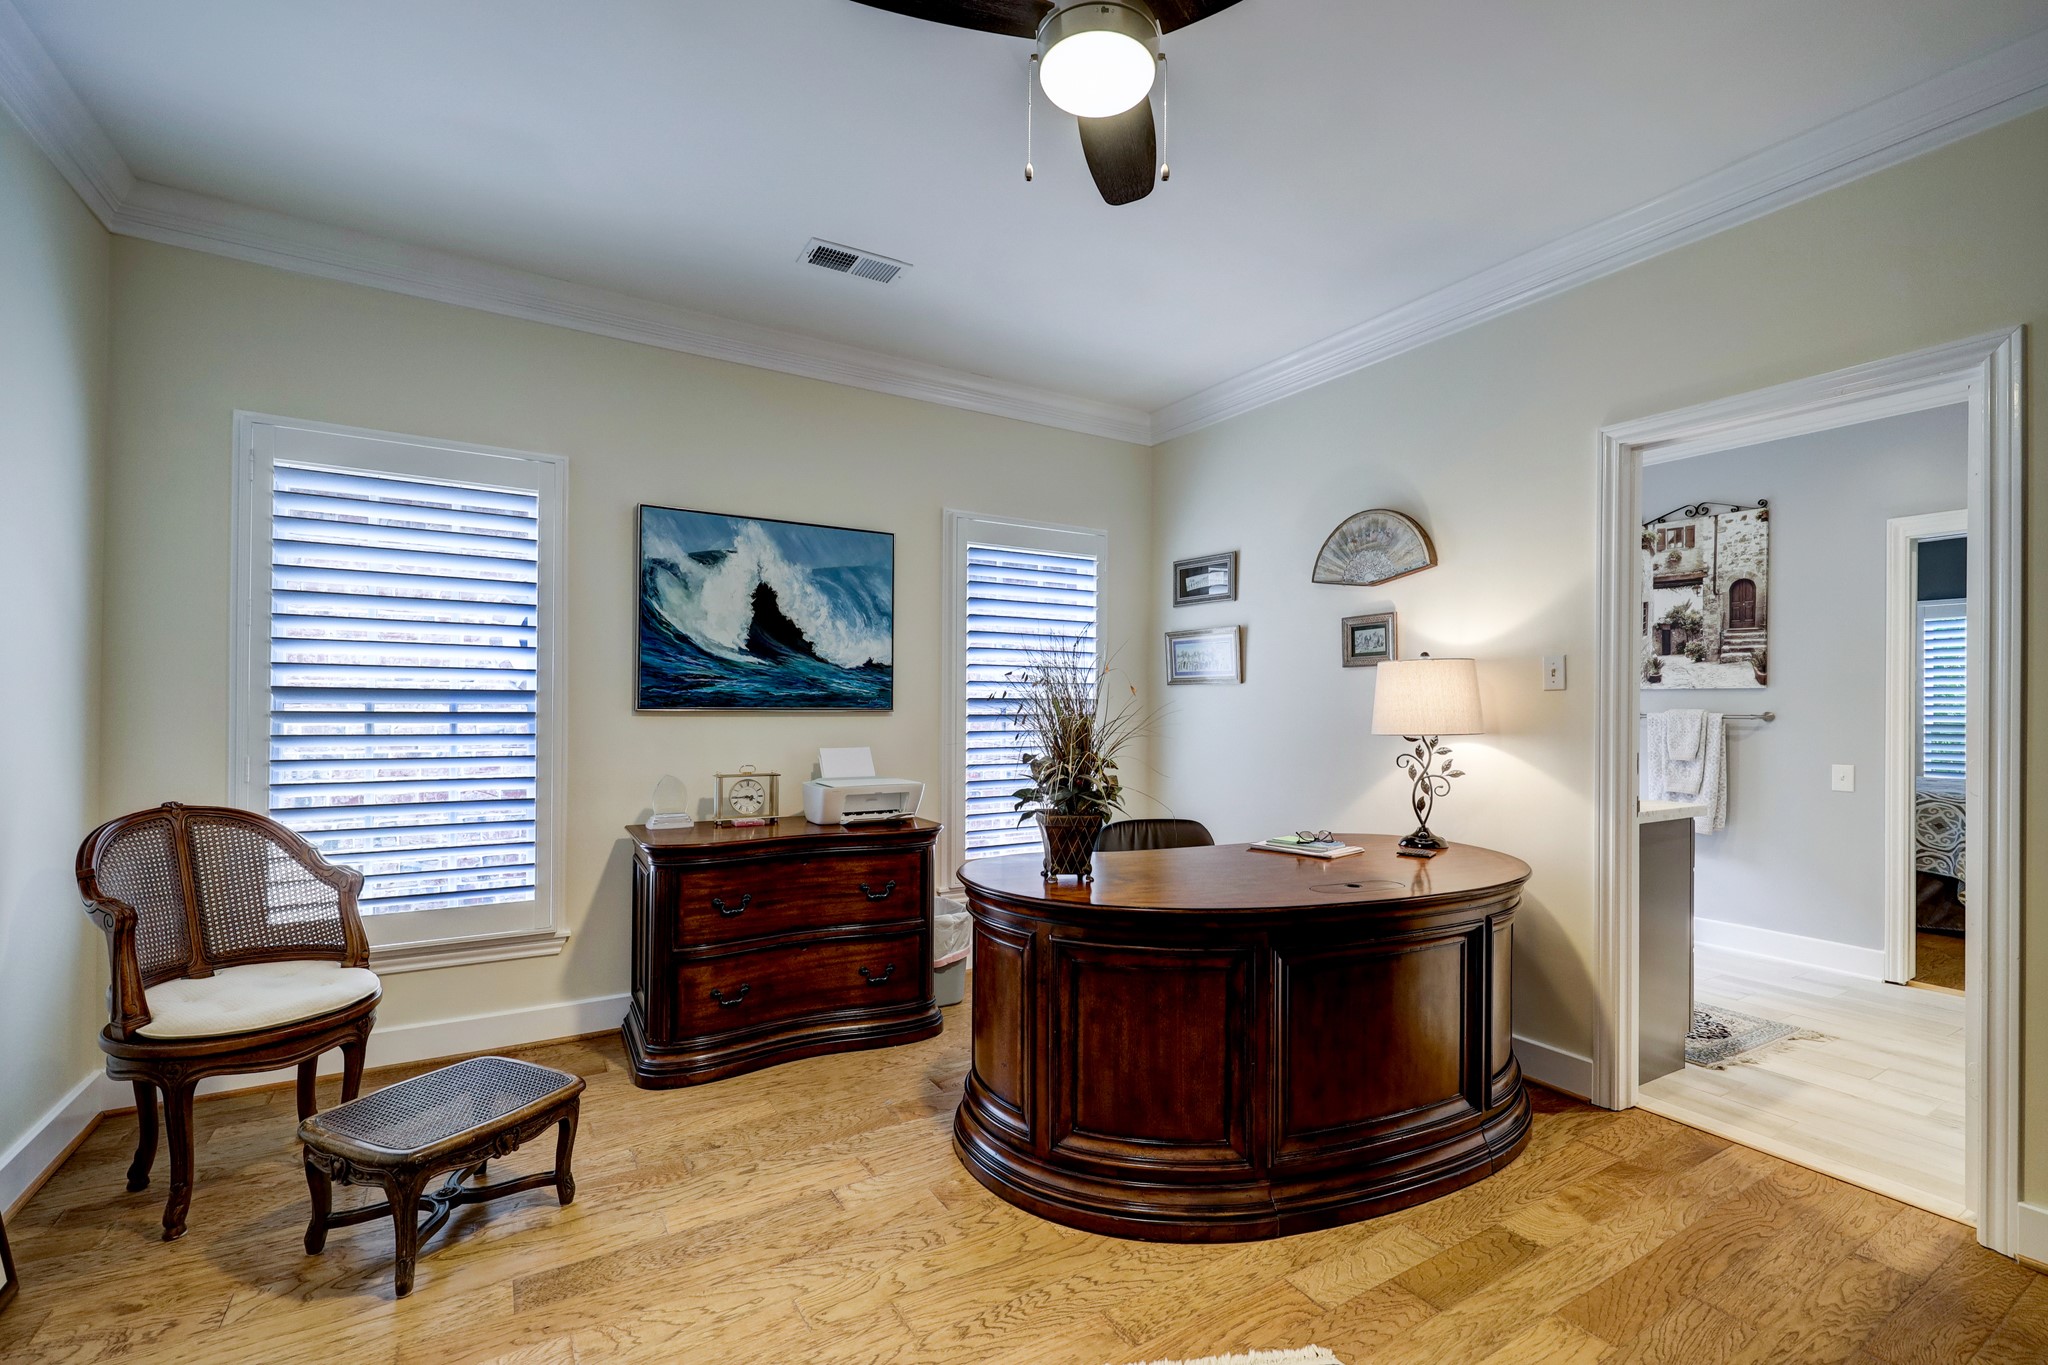 Currently being used as a home office, this secondary bedroom also features hardwood floors, ceiling fan and custom shutters.